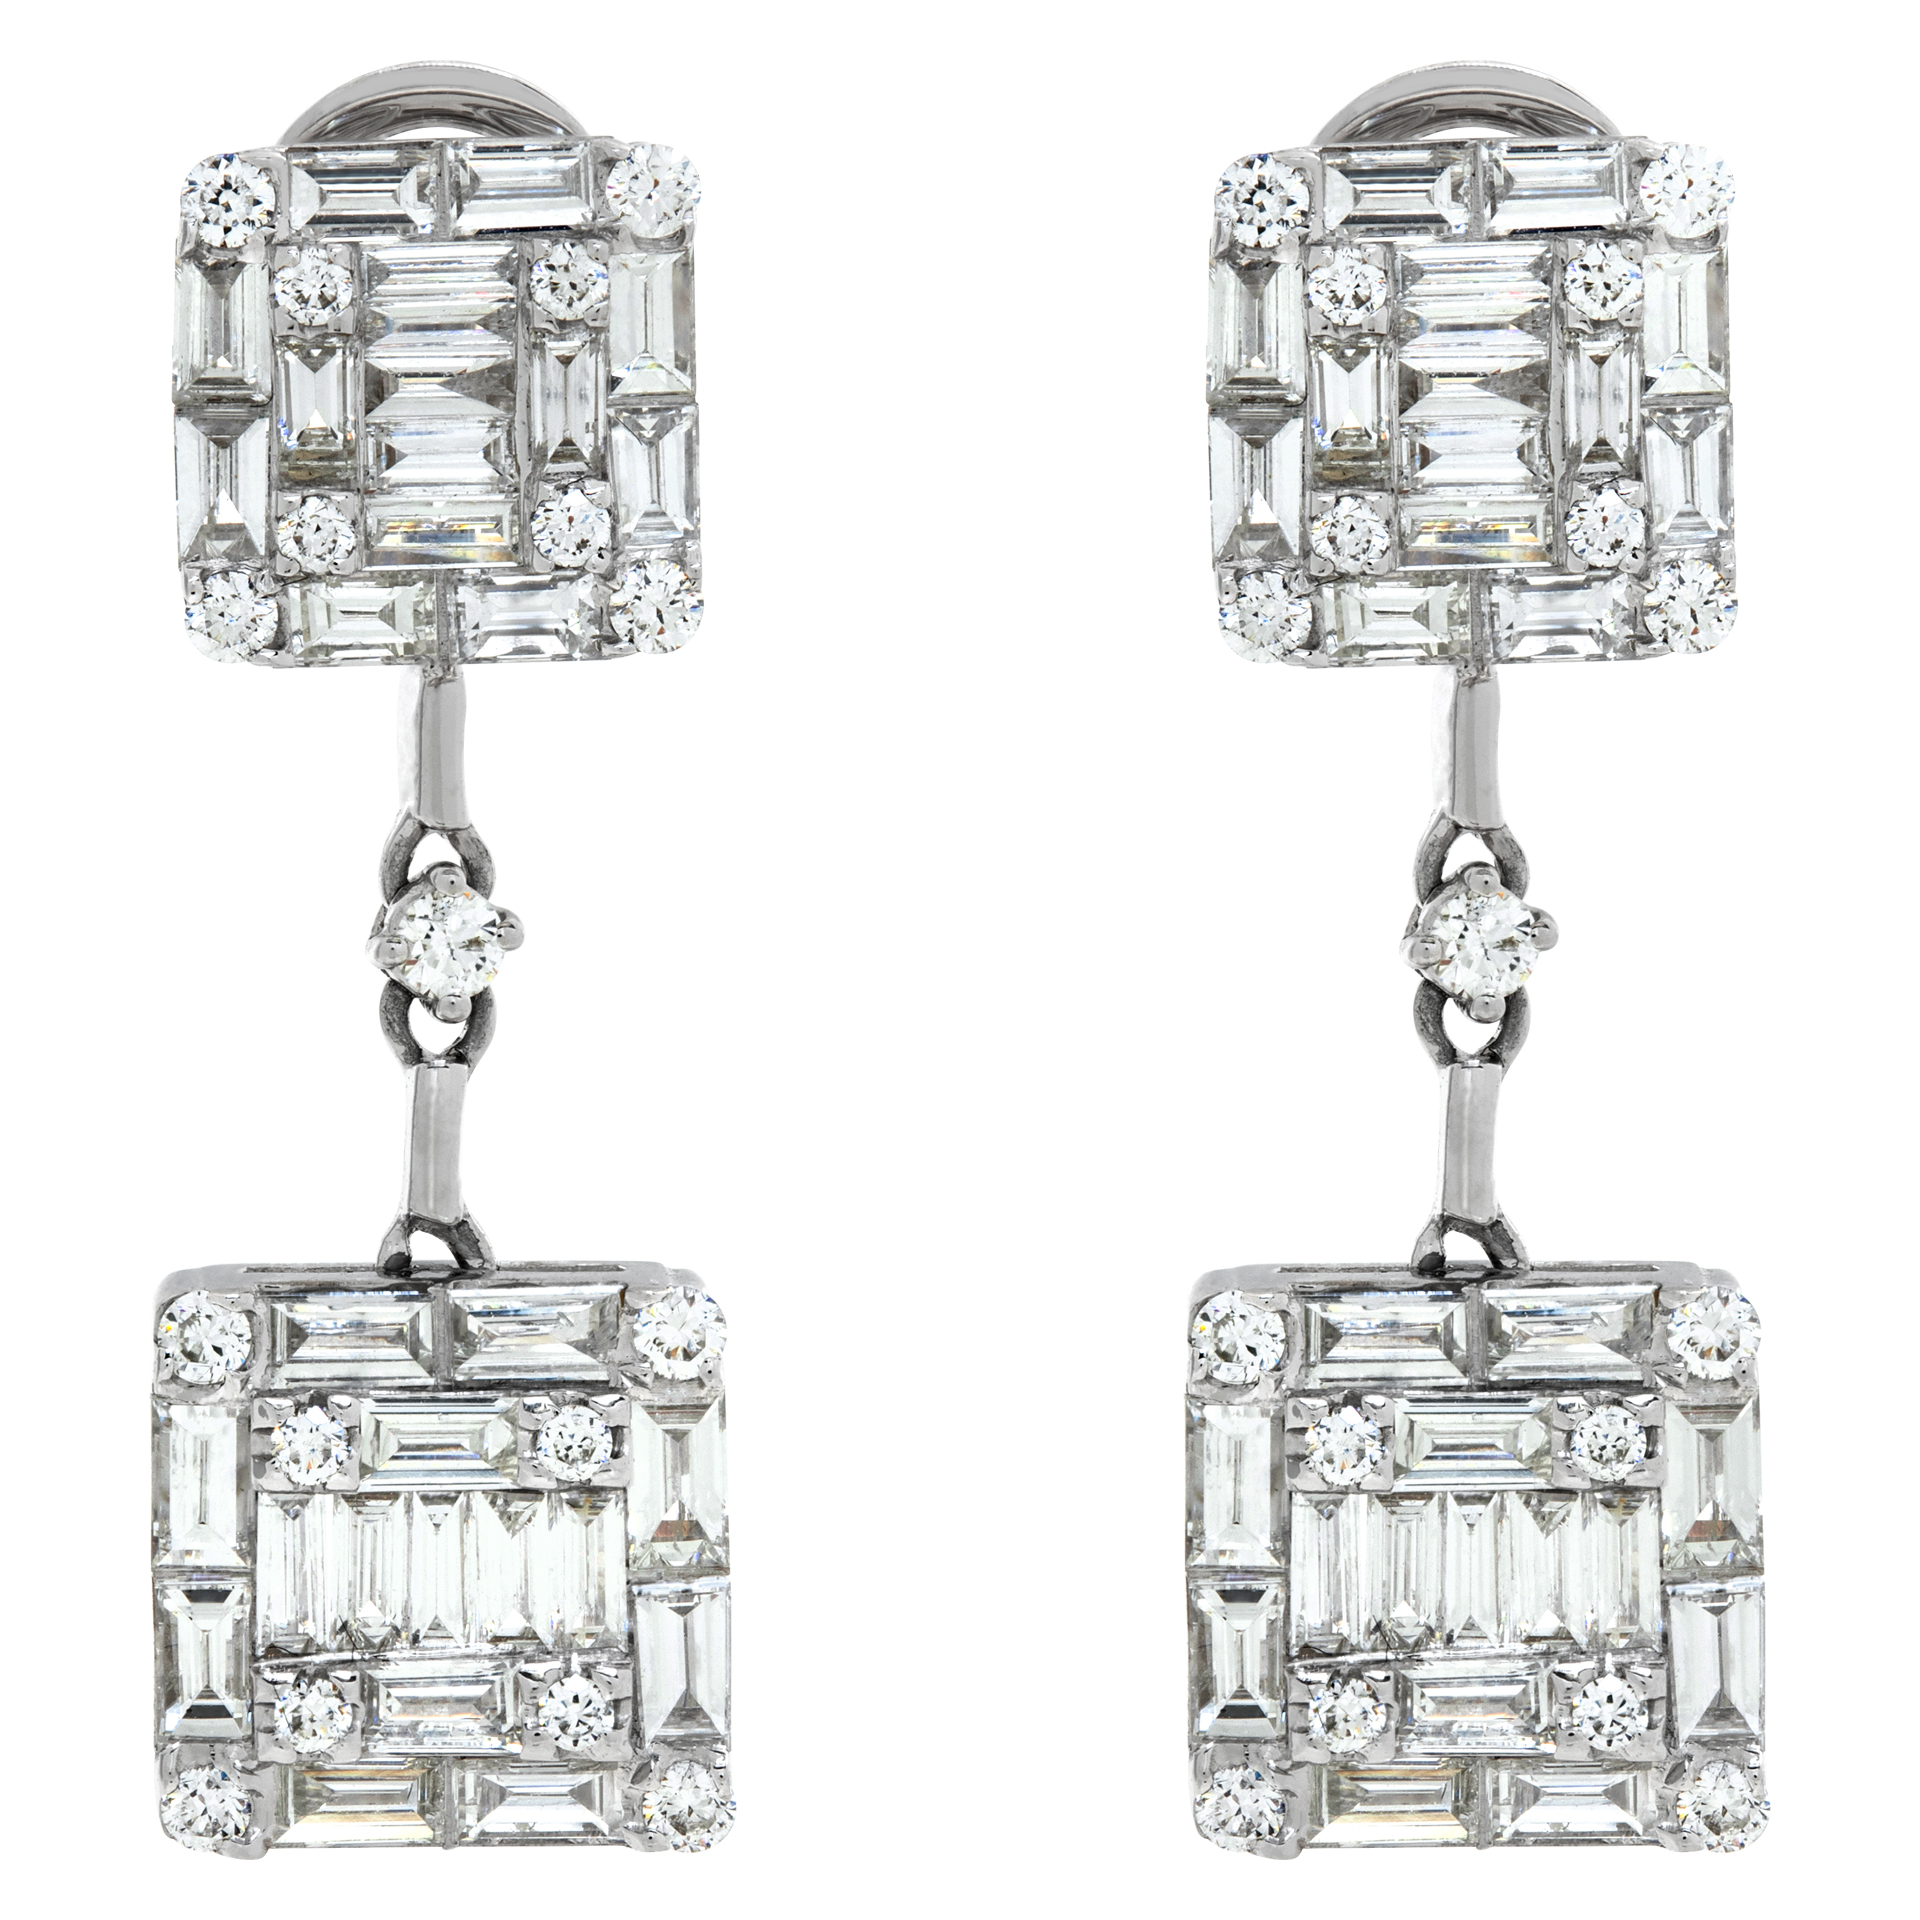 18k white gold illusion set diamond earrings with 2.15 carats in baguette & round cut diamonds